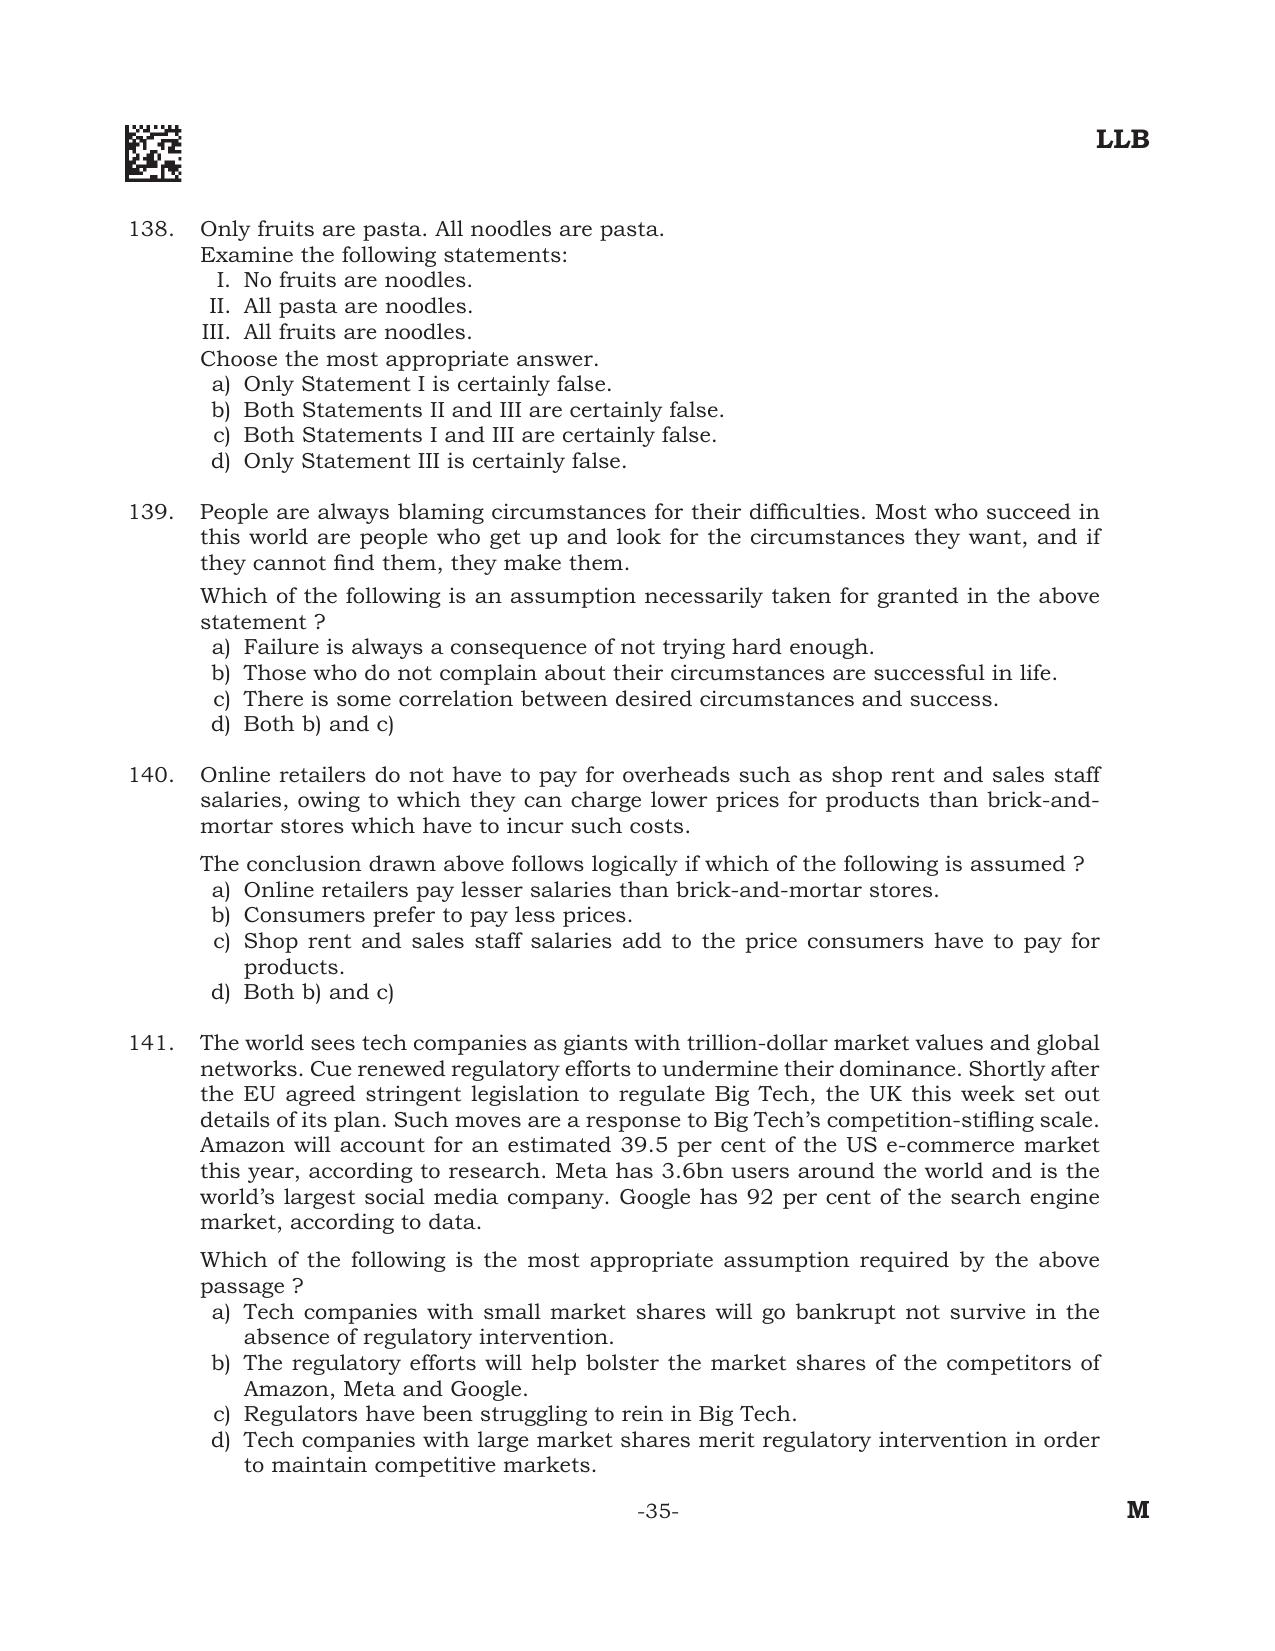 AILET 2022 Question Paper for BA LLB - Page 35